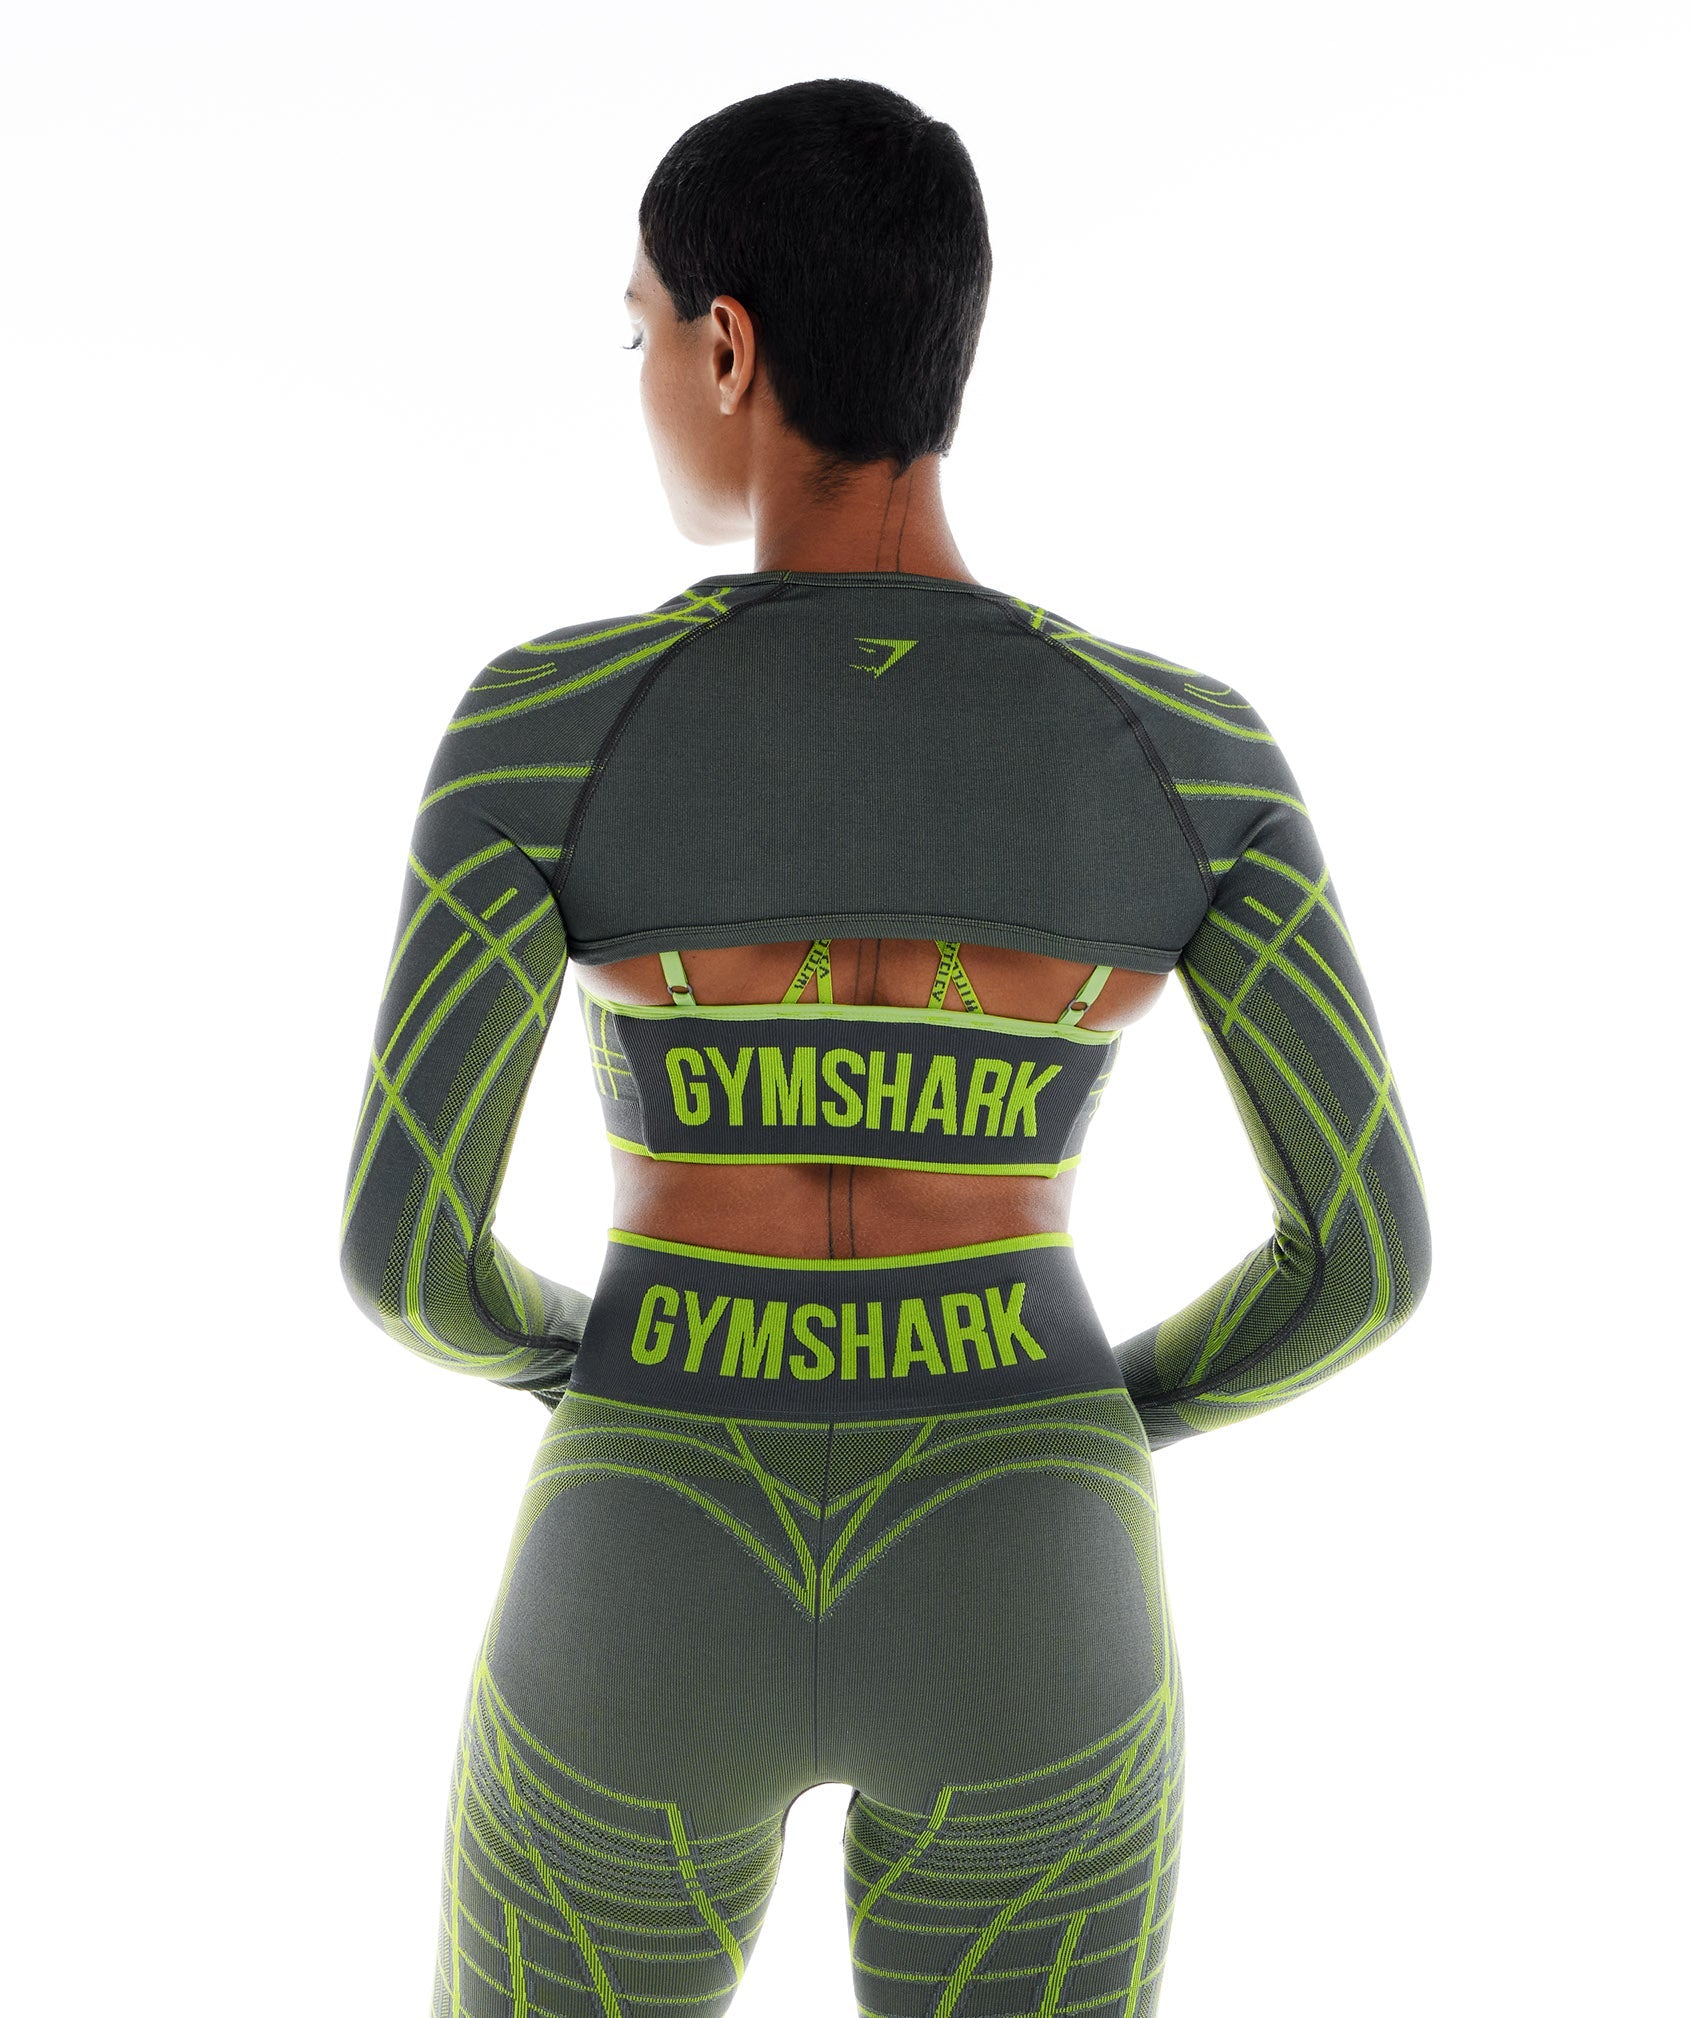 Wtflex Linear Seamless Long Sleeve Shrug in  Charcoal Grey/Fluo Green/Light Grey - view 2